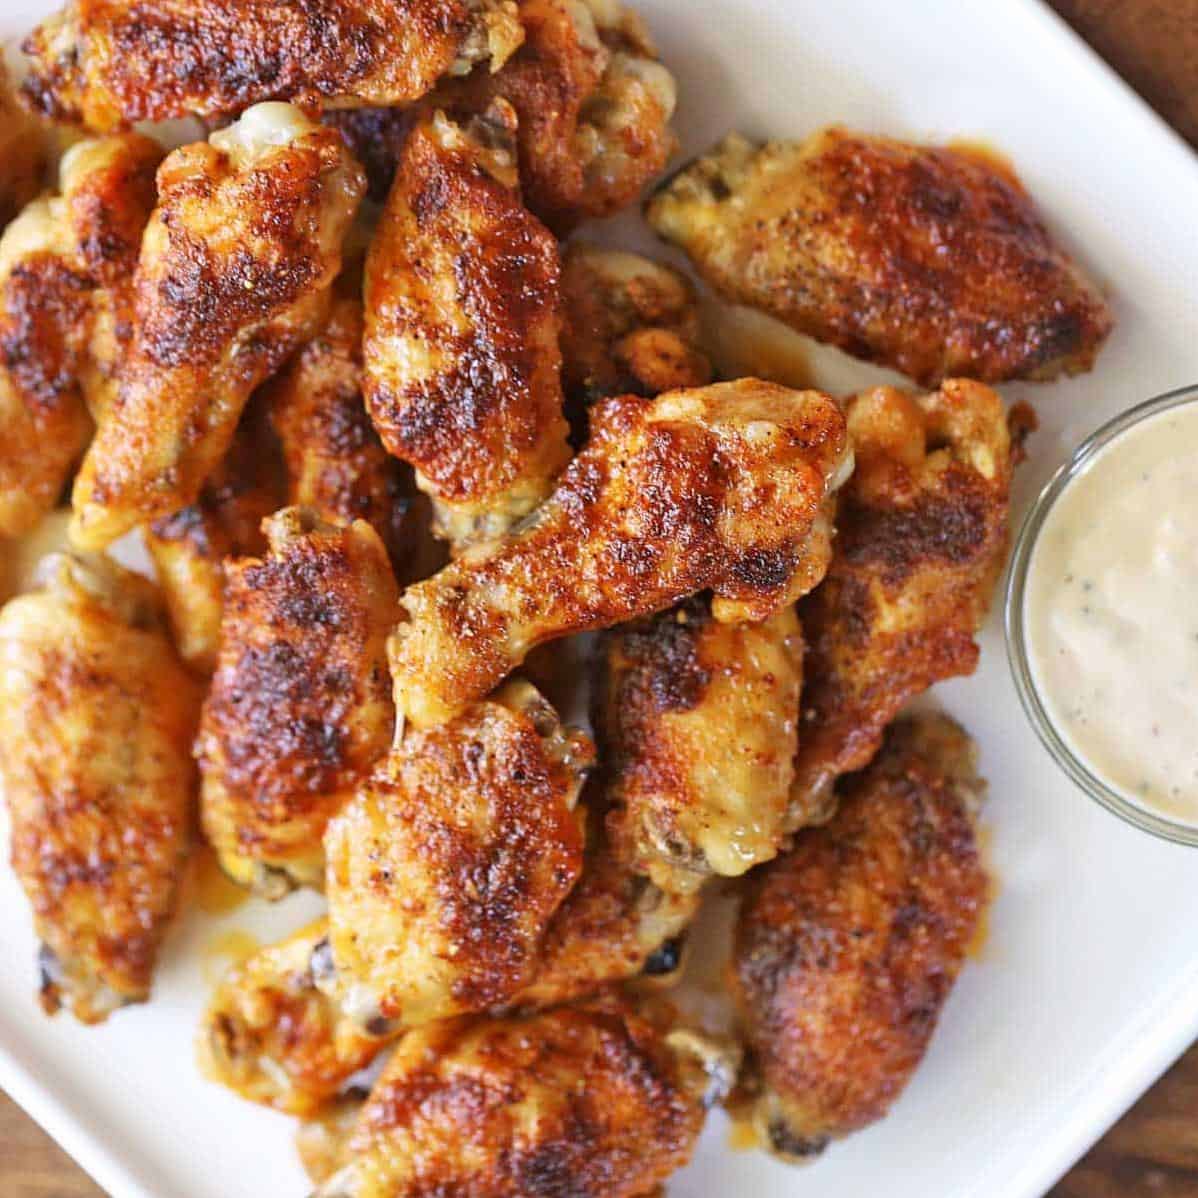  Perfectly seasoned and cooked to perfection, these wings are a must-have at any party.